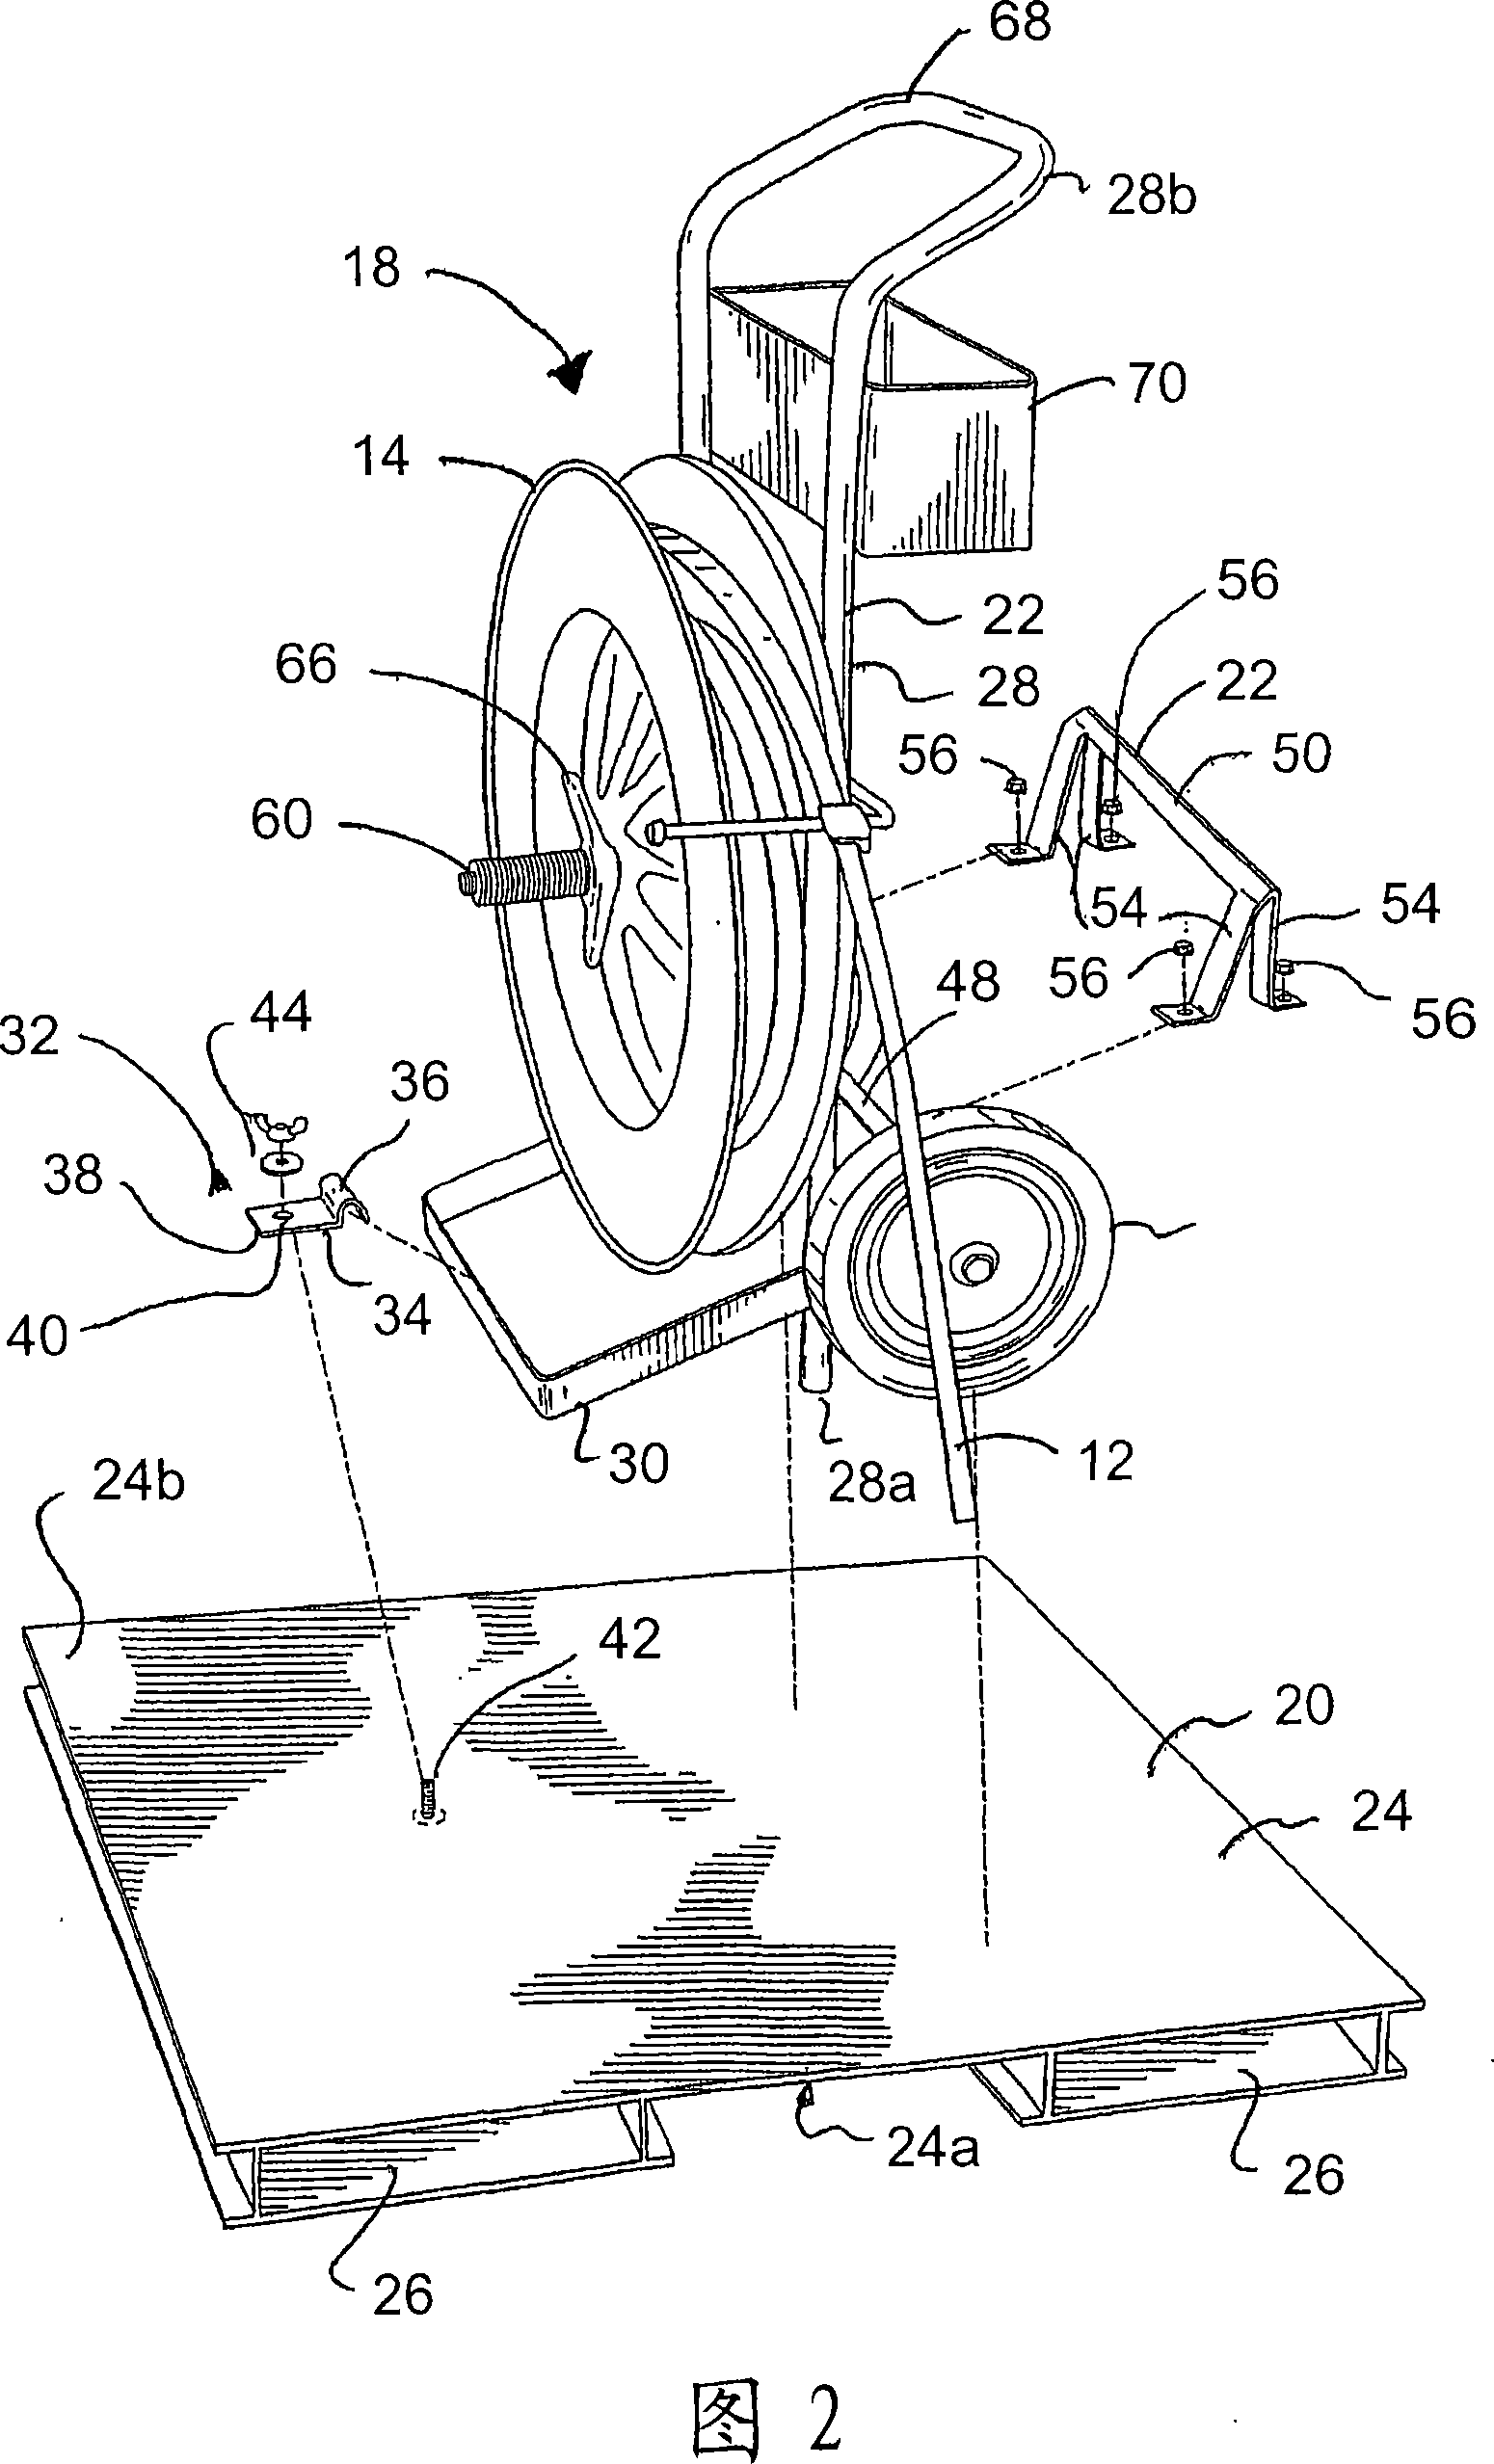 Method and apparatus for transporting and dispensing a strap